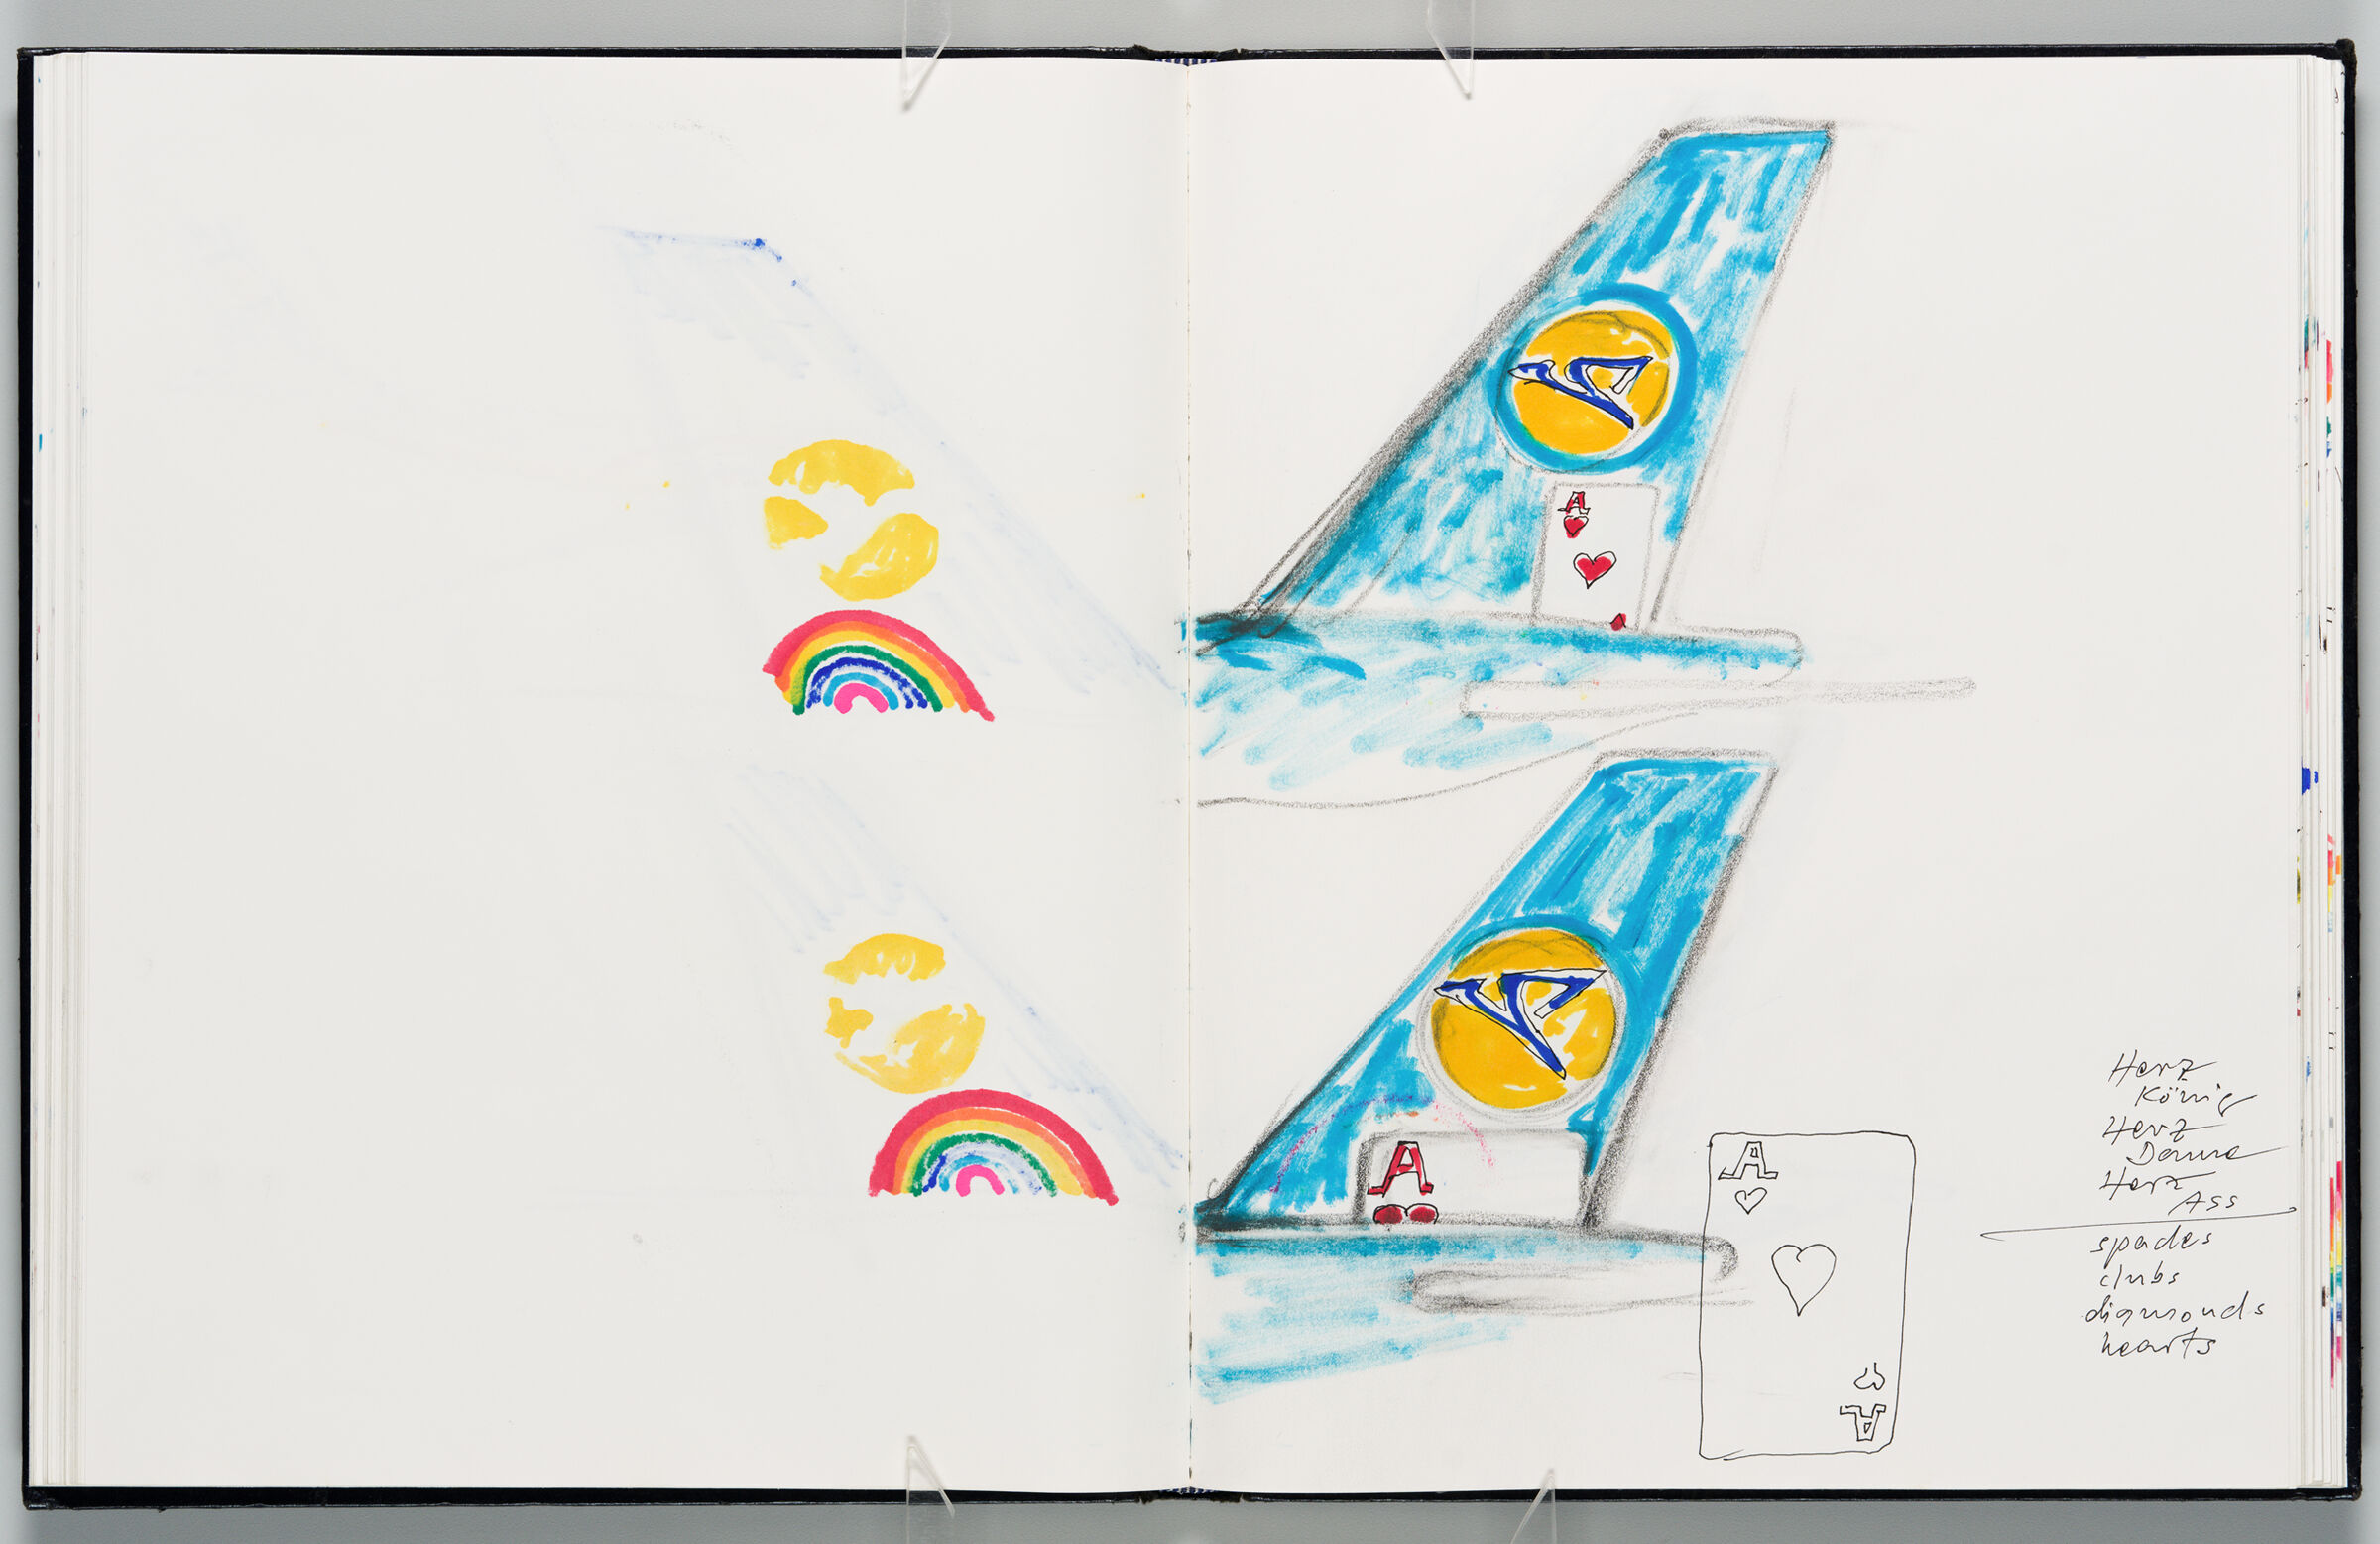 Untitled (Bleed-Through Of Previous Page, Left Page); Untitled (Playing Card Designs For Condor Planes, Right Page)